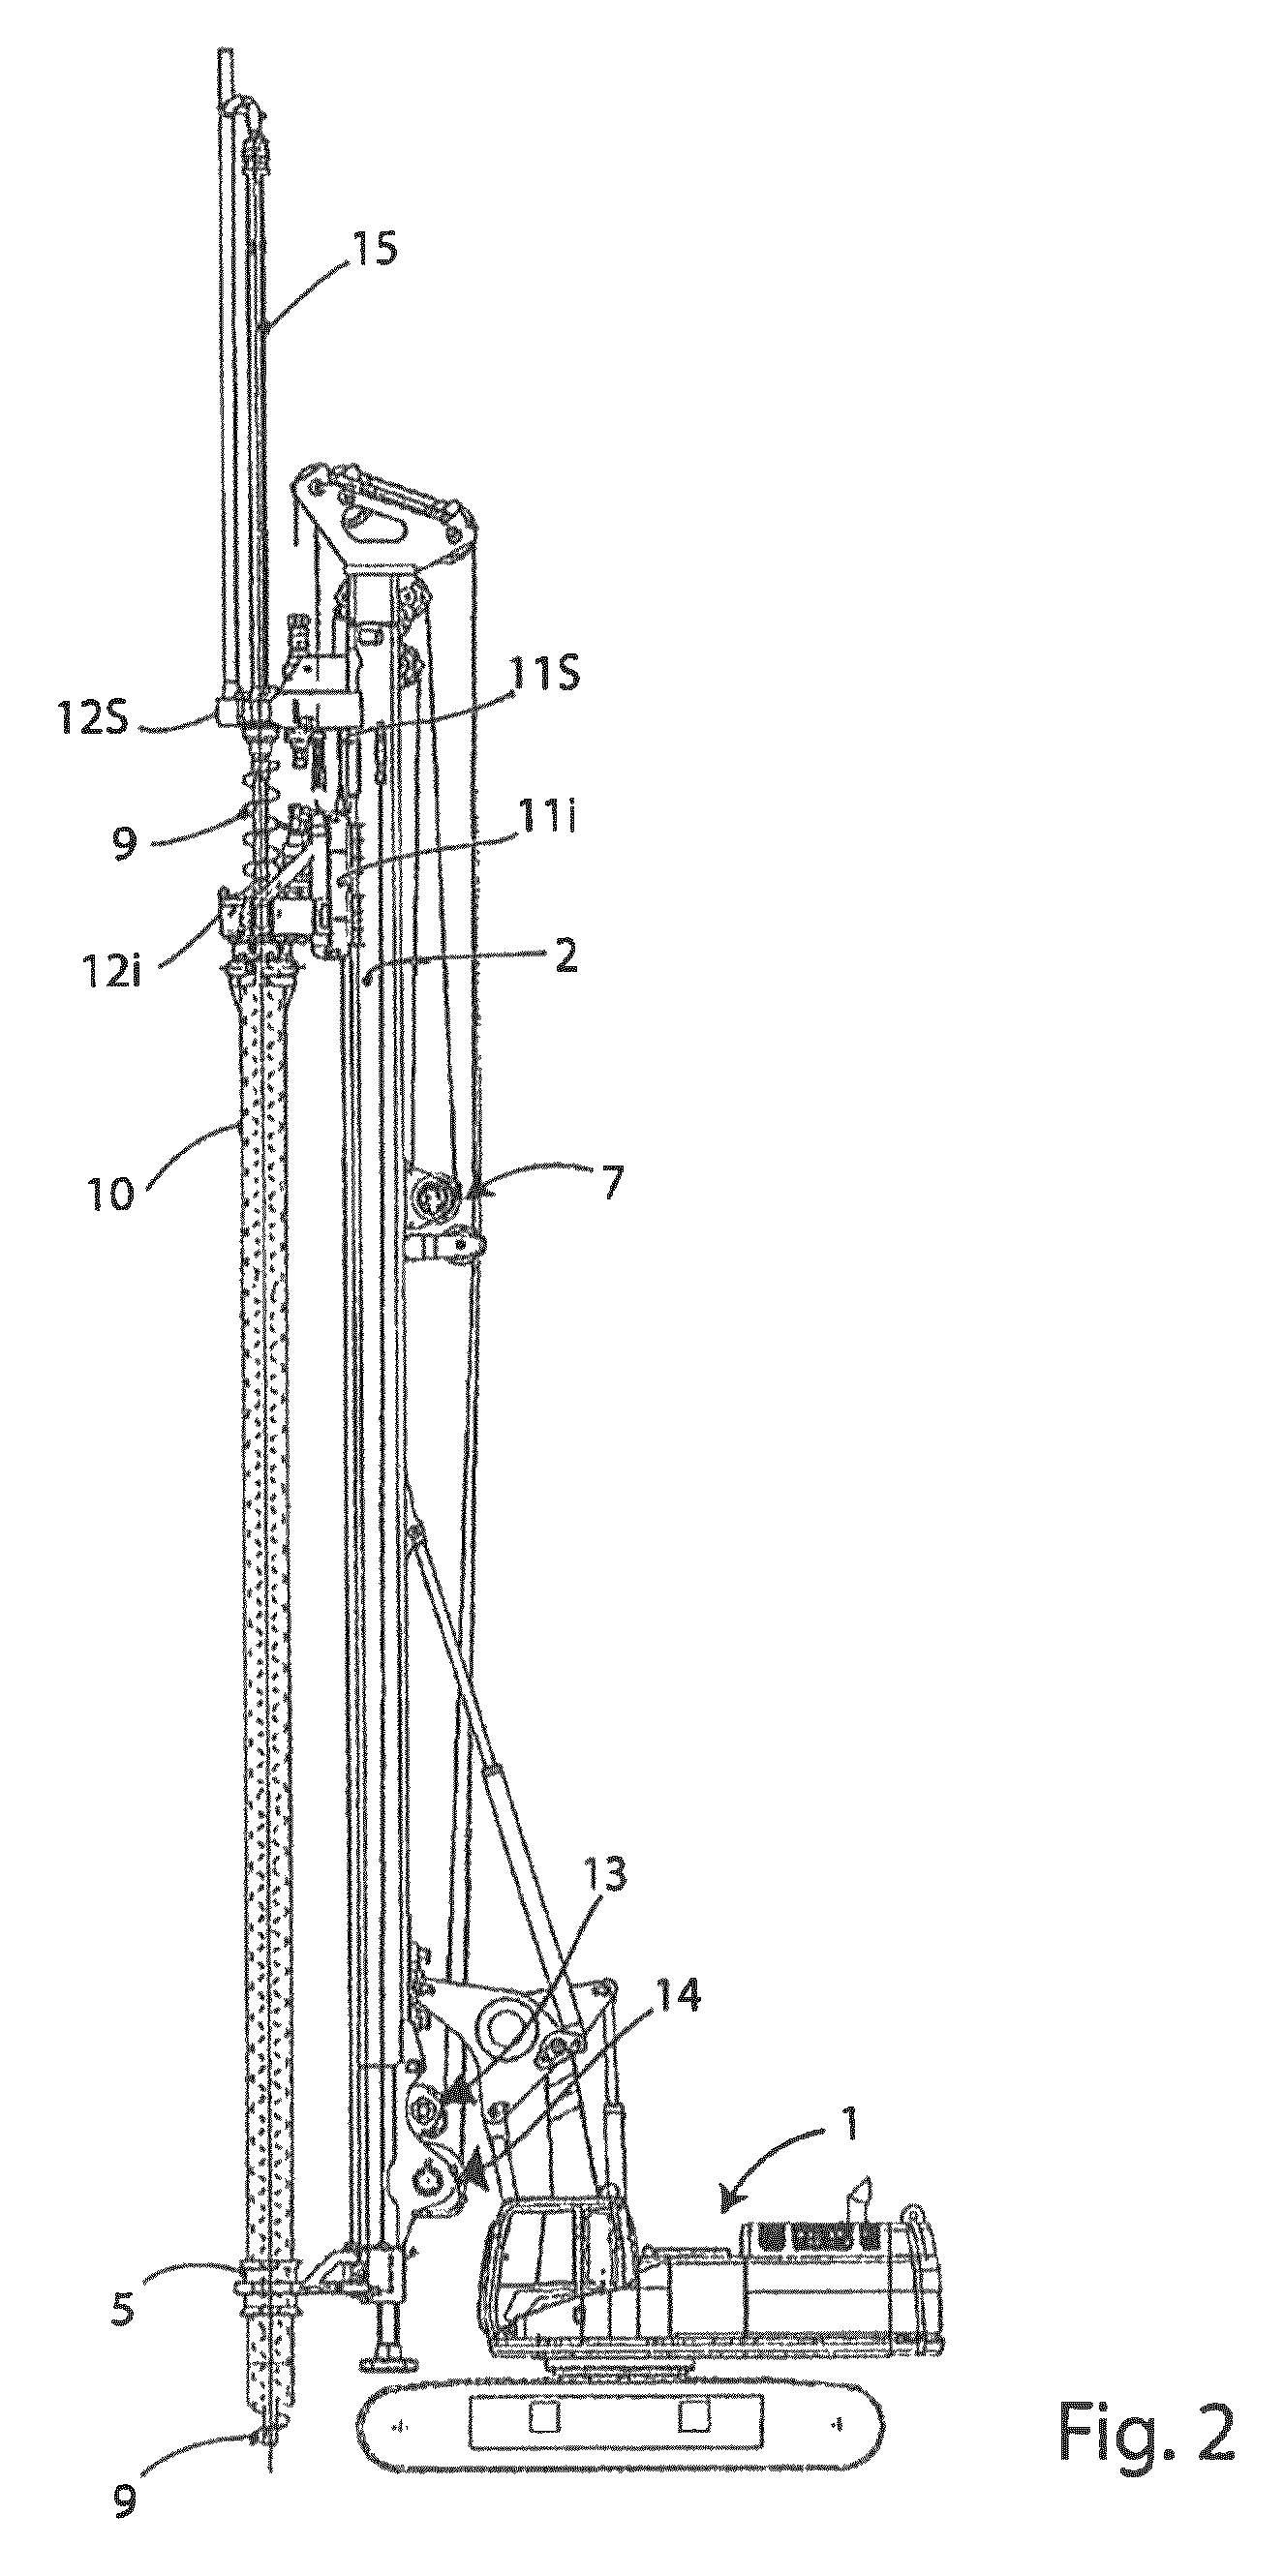 Helical drill bit for an auger of a ground excavation assembly, in particular for building excavated piles, and drilling method that uses such a bit